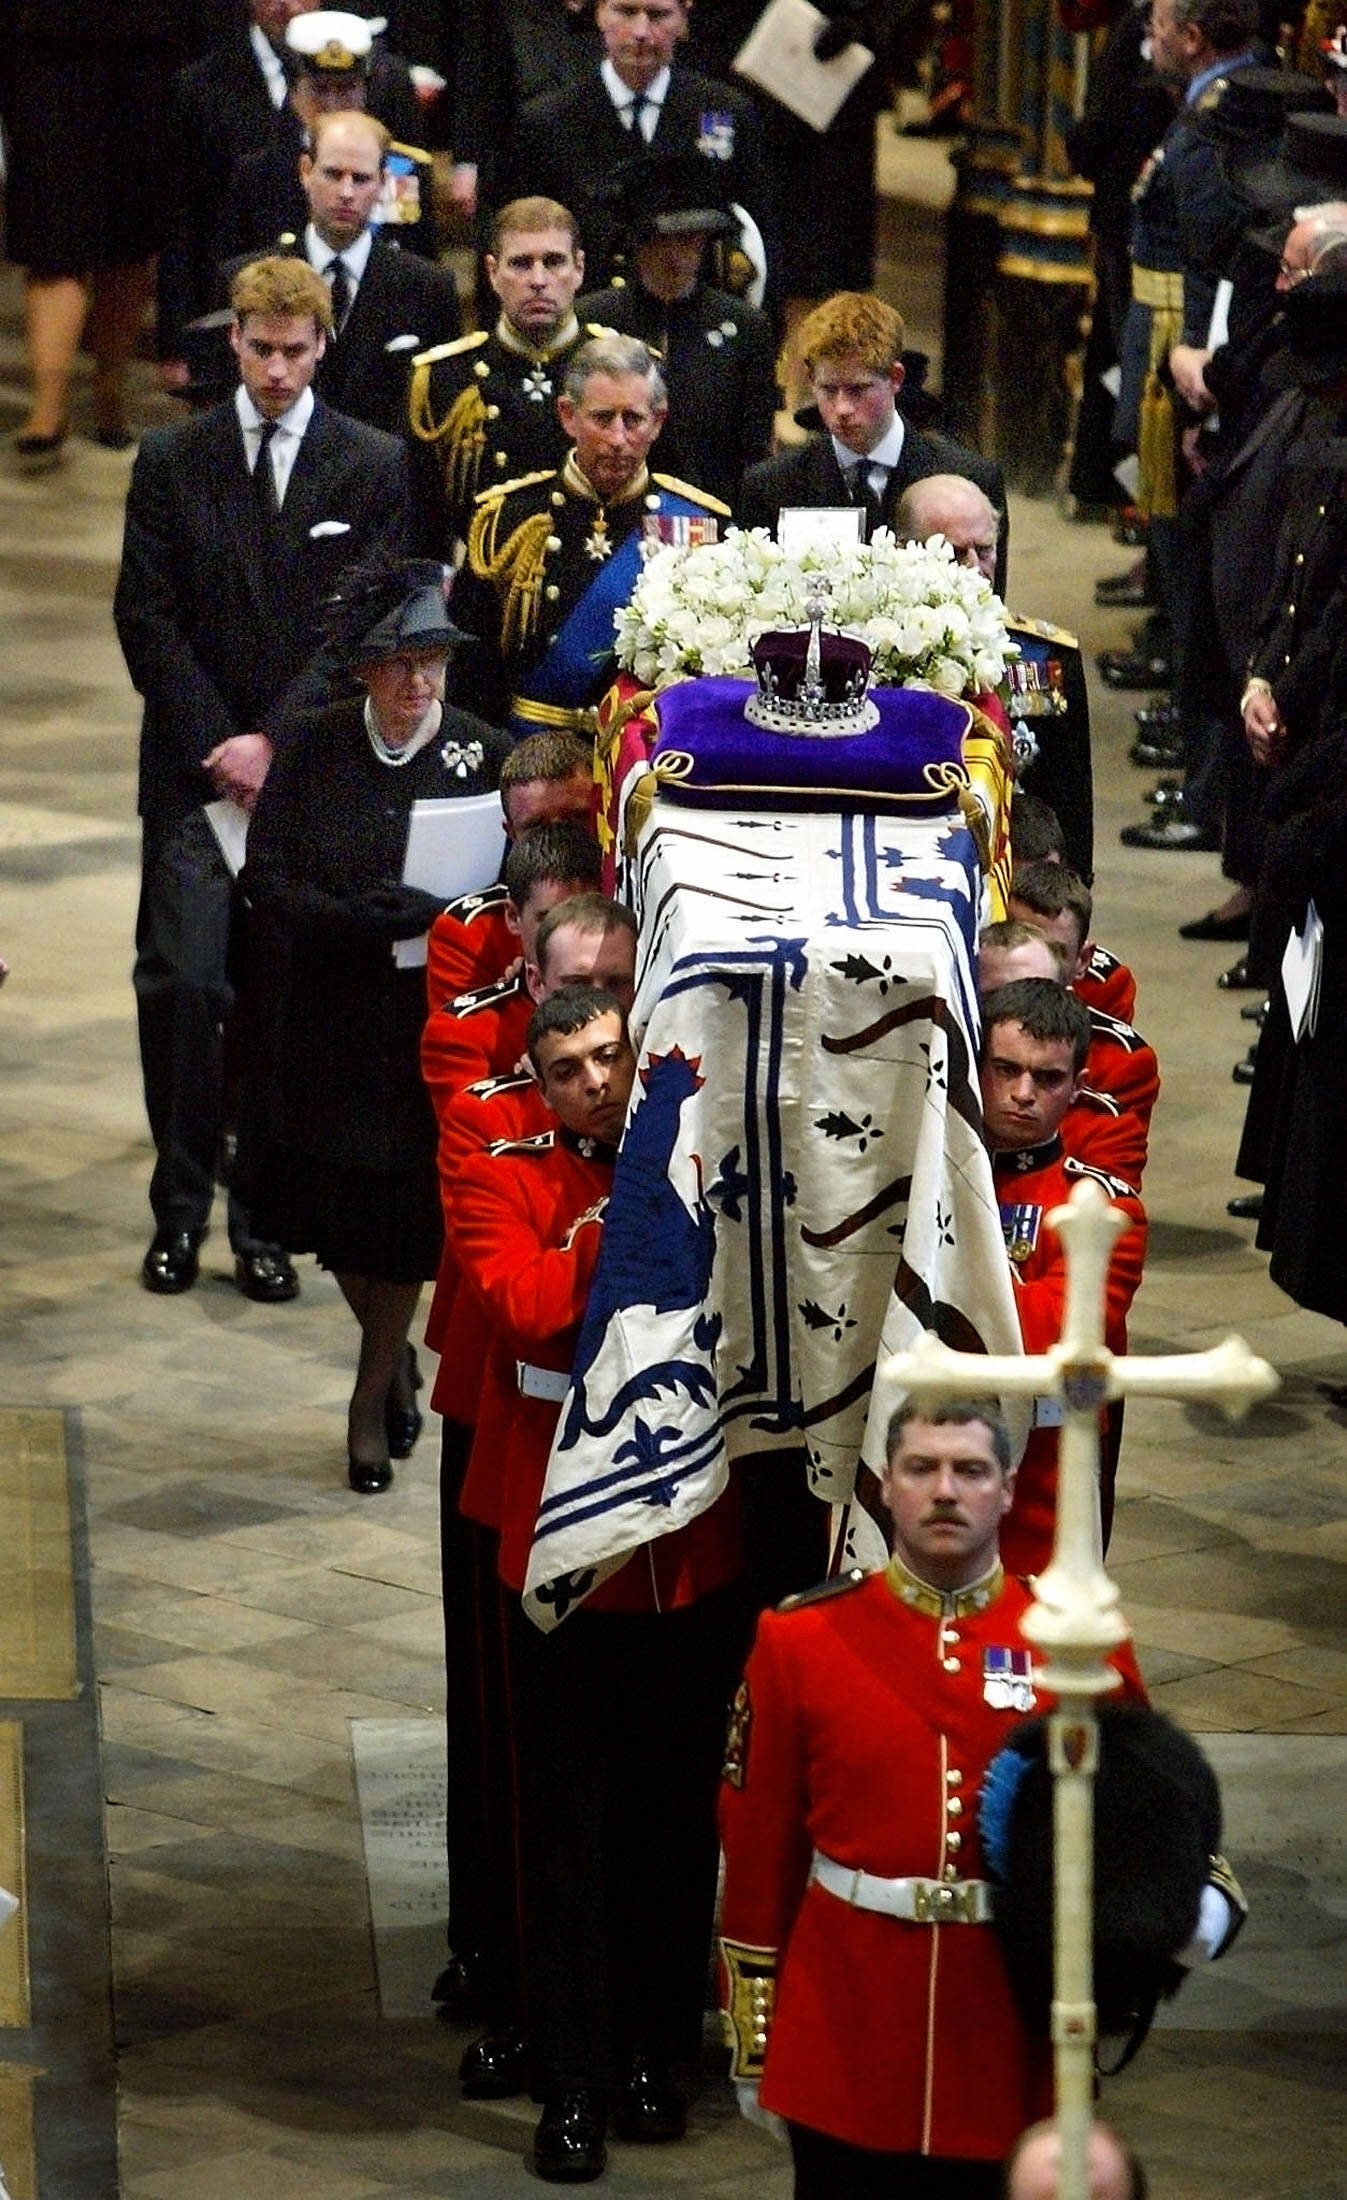 The royal family follows the Queen Mother's coffin out of Westminster Abbey after her funeral service